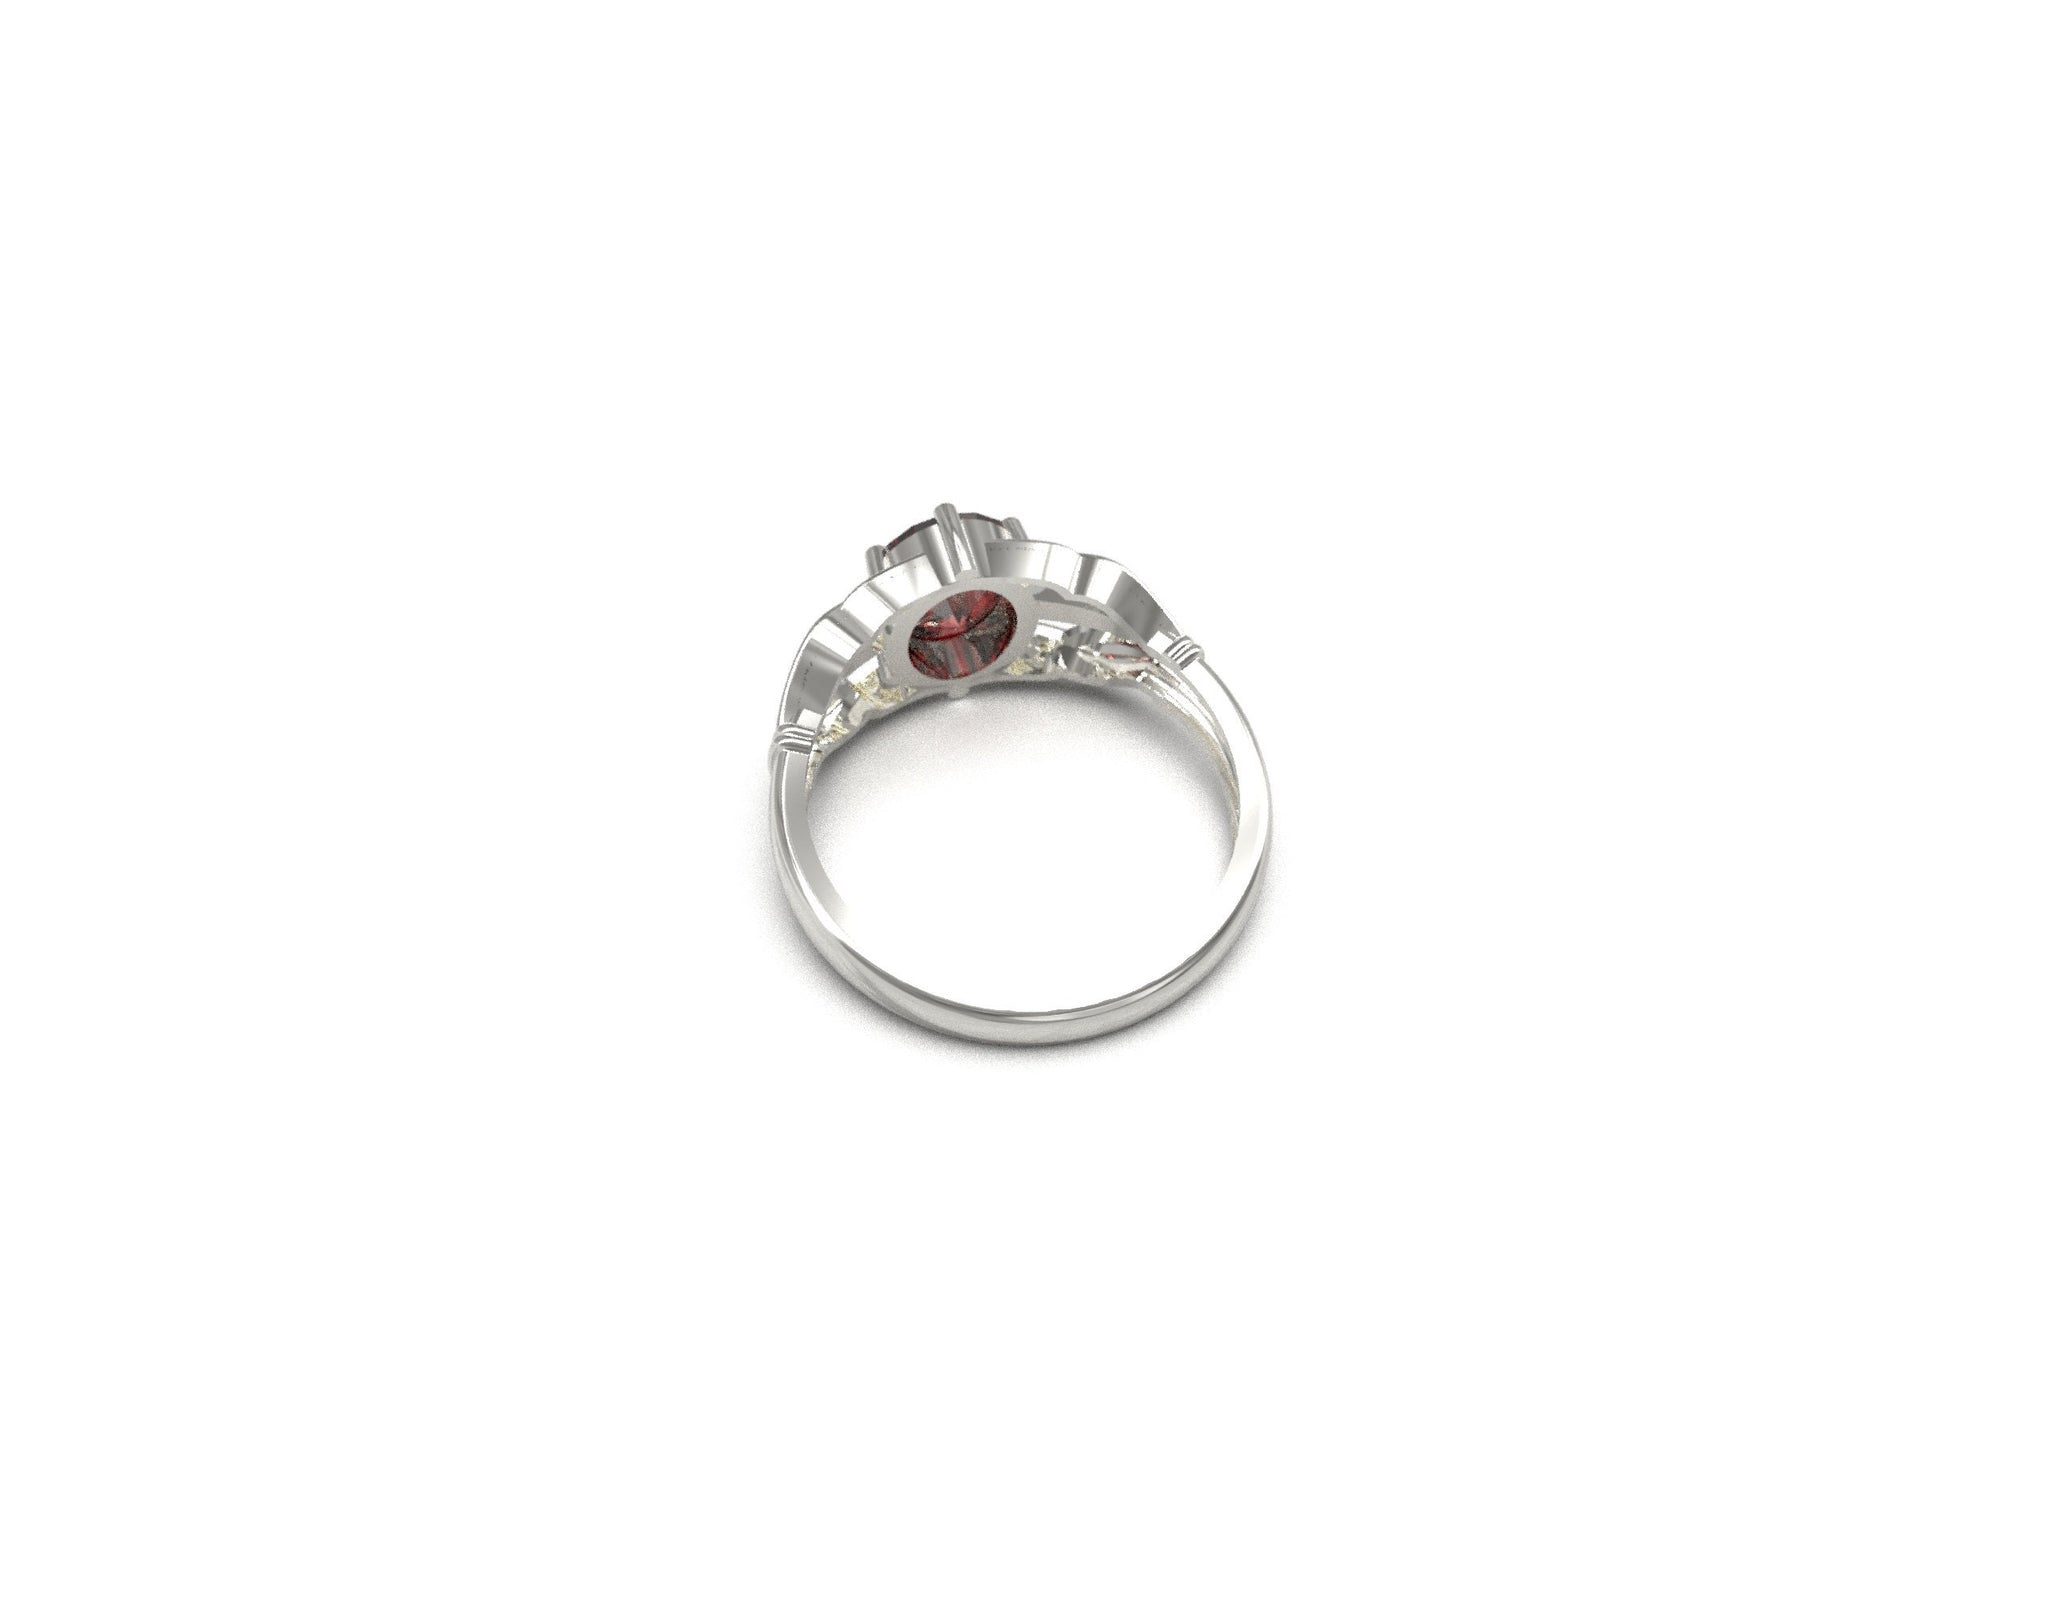 Sterling Silver Garnet Ring 7x9 mm Oval Natural Garnet Anniversary Gift Red Stone Ring Silver Birthstone Ring Unique Silver Web Ring